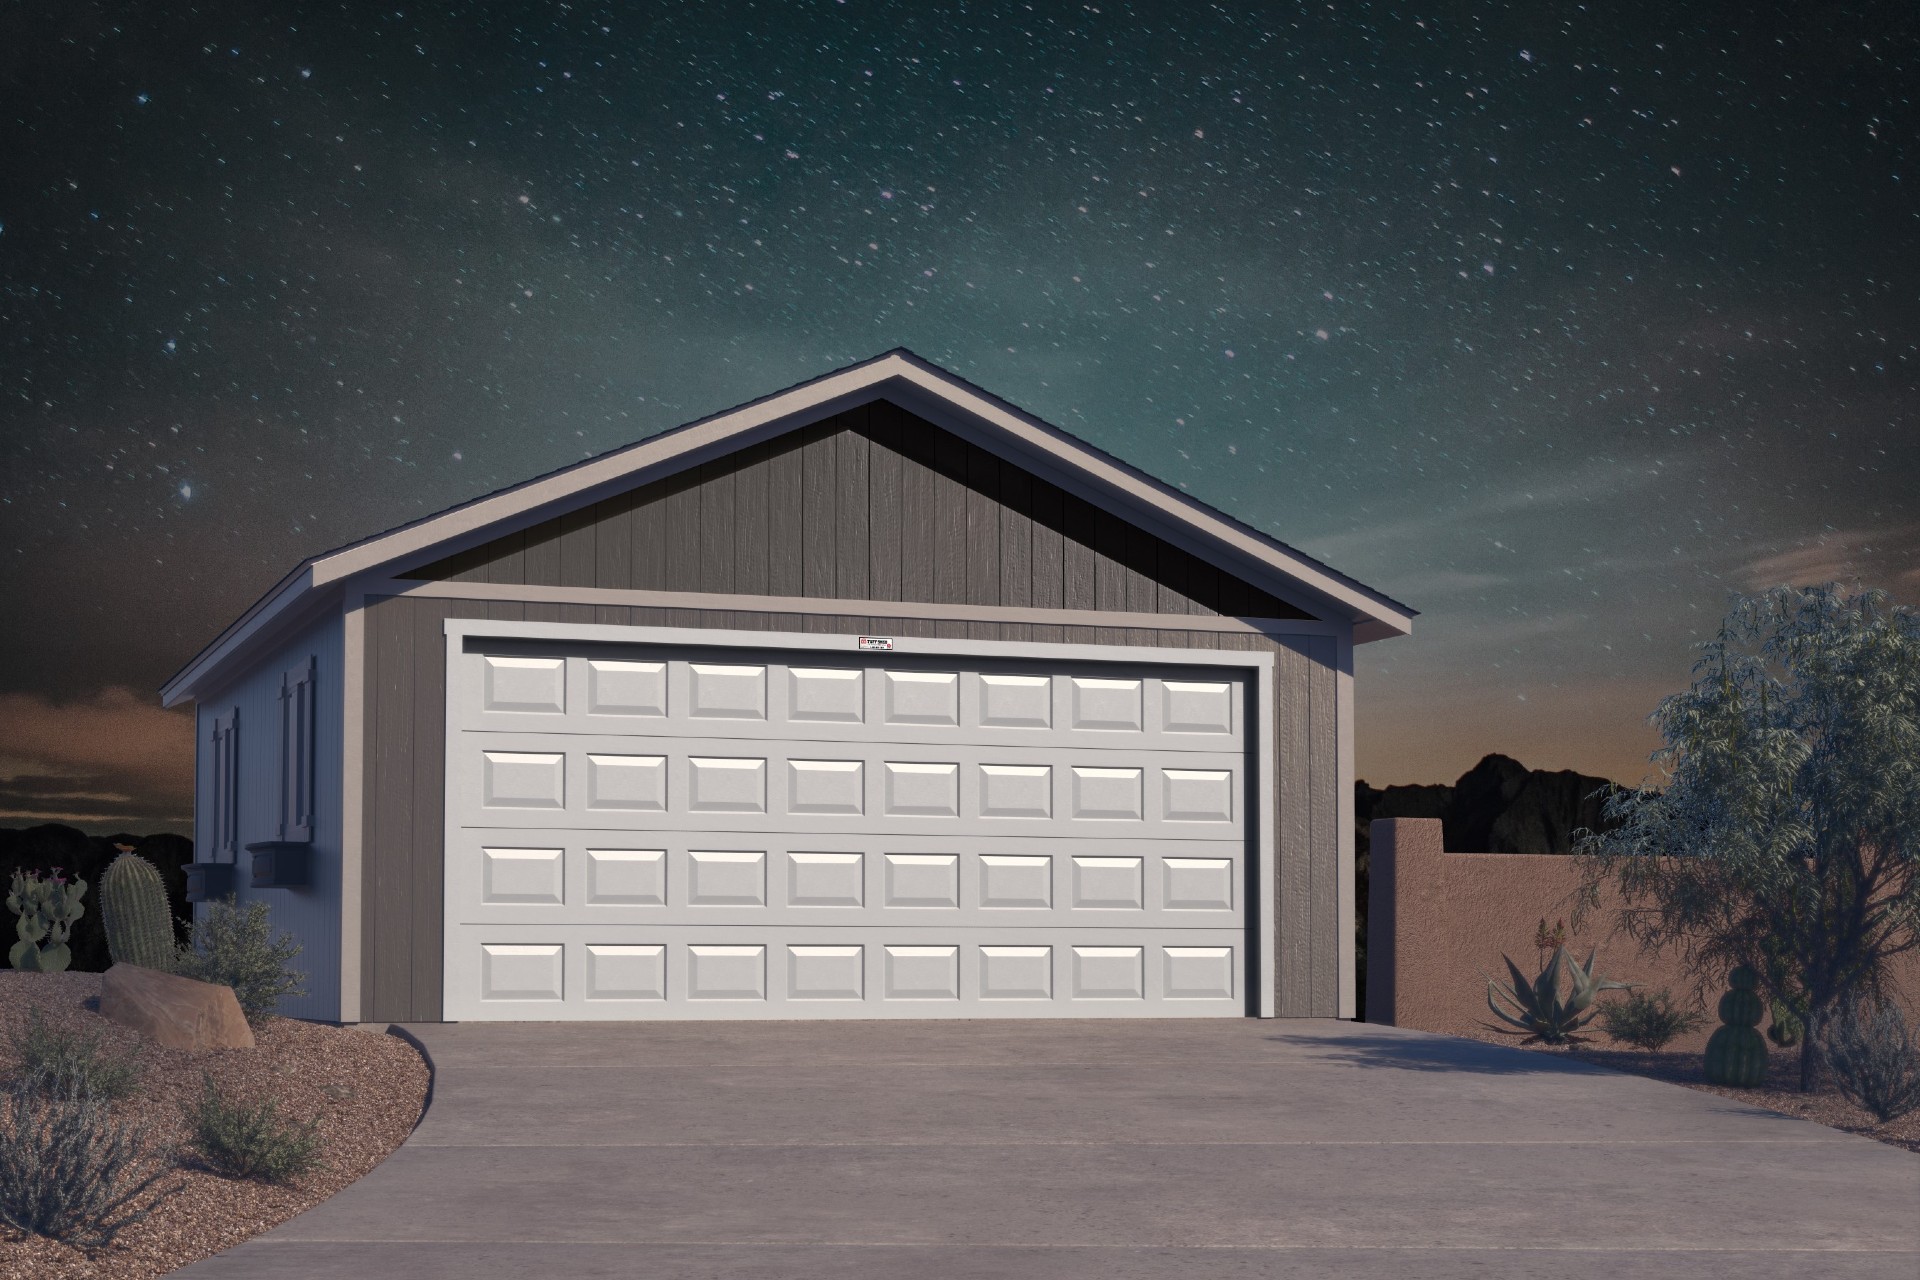 Through a collaboration with Tuff Shed, Clayton customers have an affordable garage option.